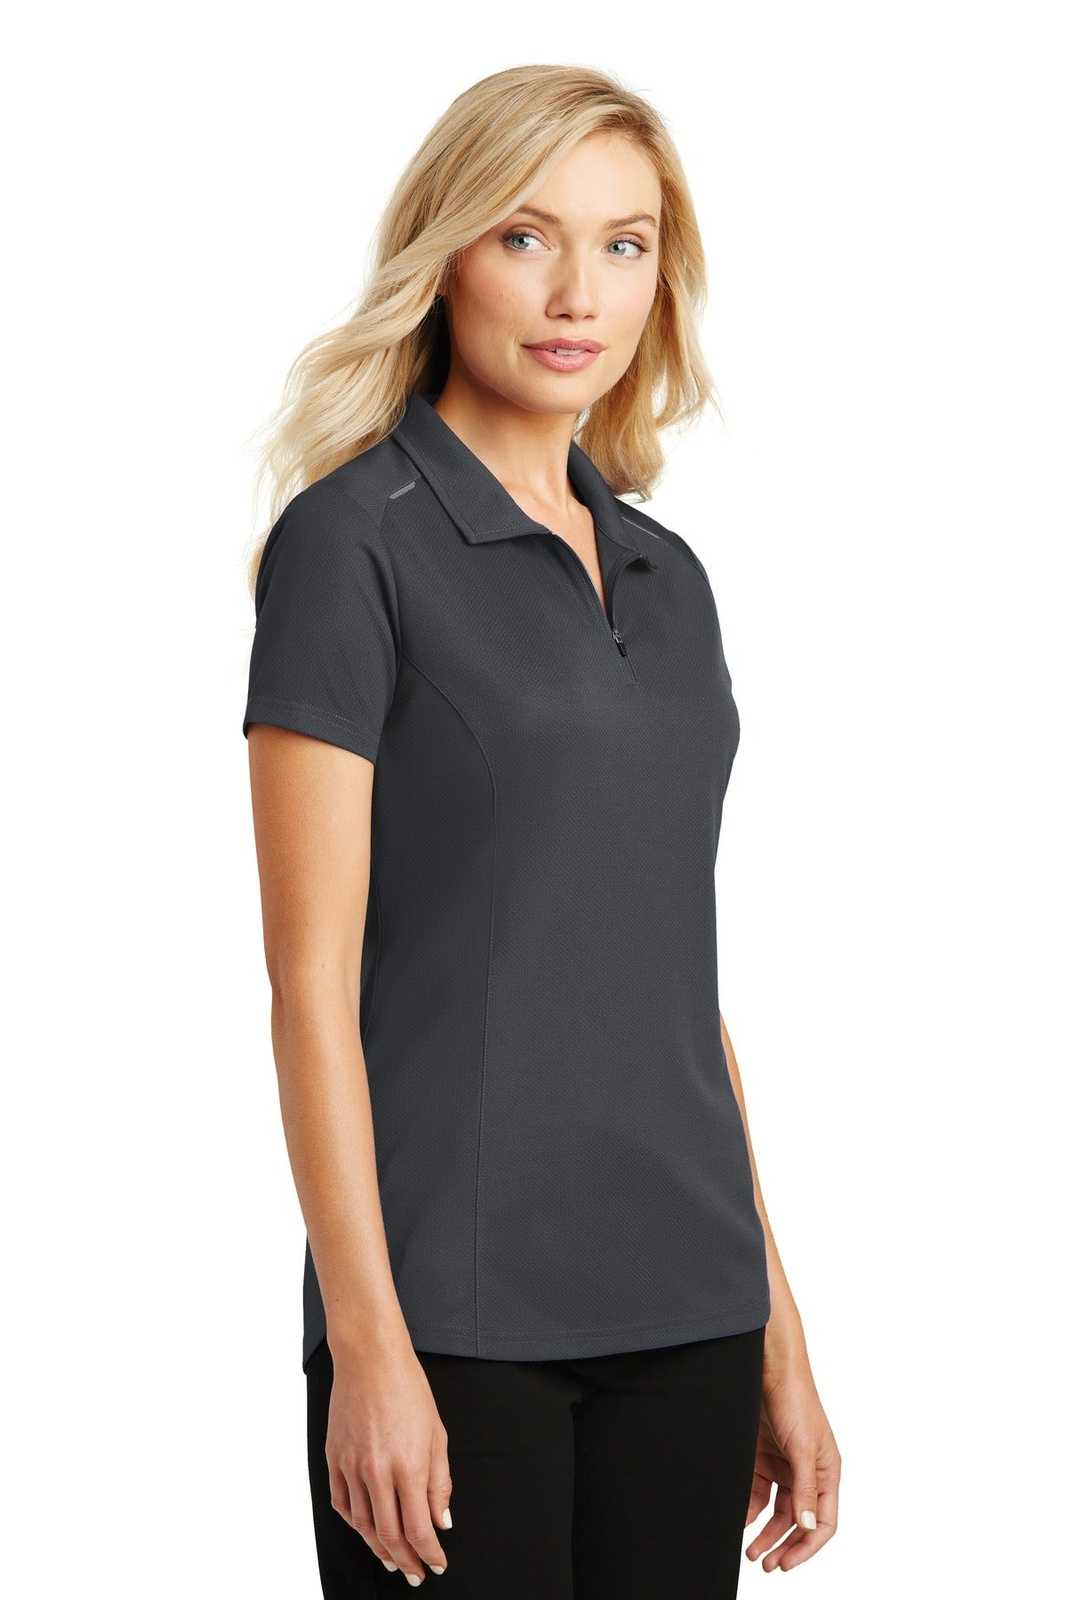 Port Authority L580 Ladies Pinpoint Mesh Zip Polo - Battleship Gray - HIT a Double - 4